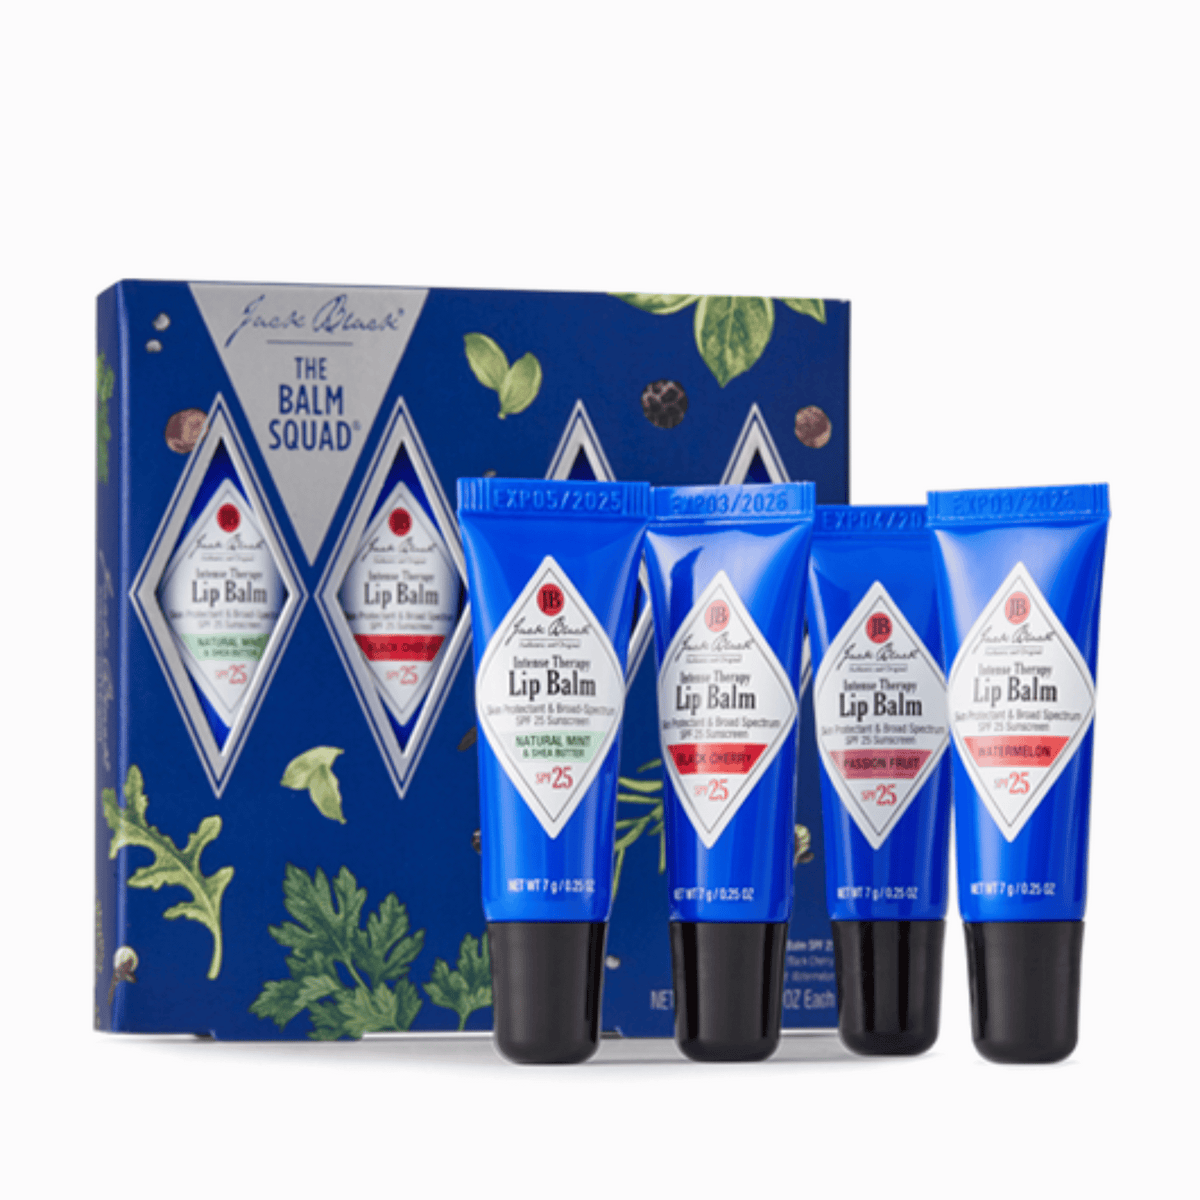 Primary Image of The Balm Squad Holiday Set